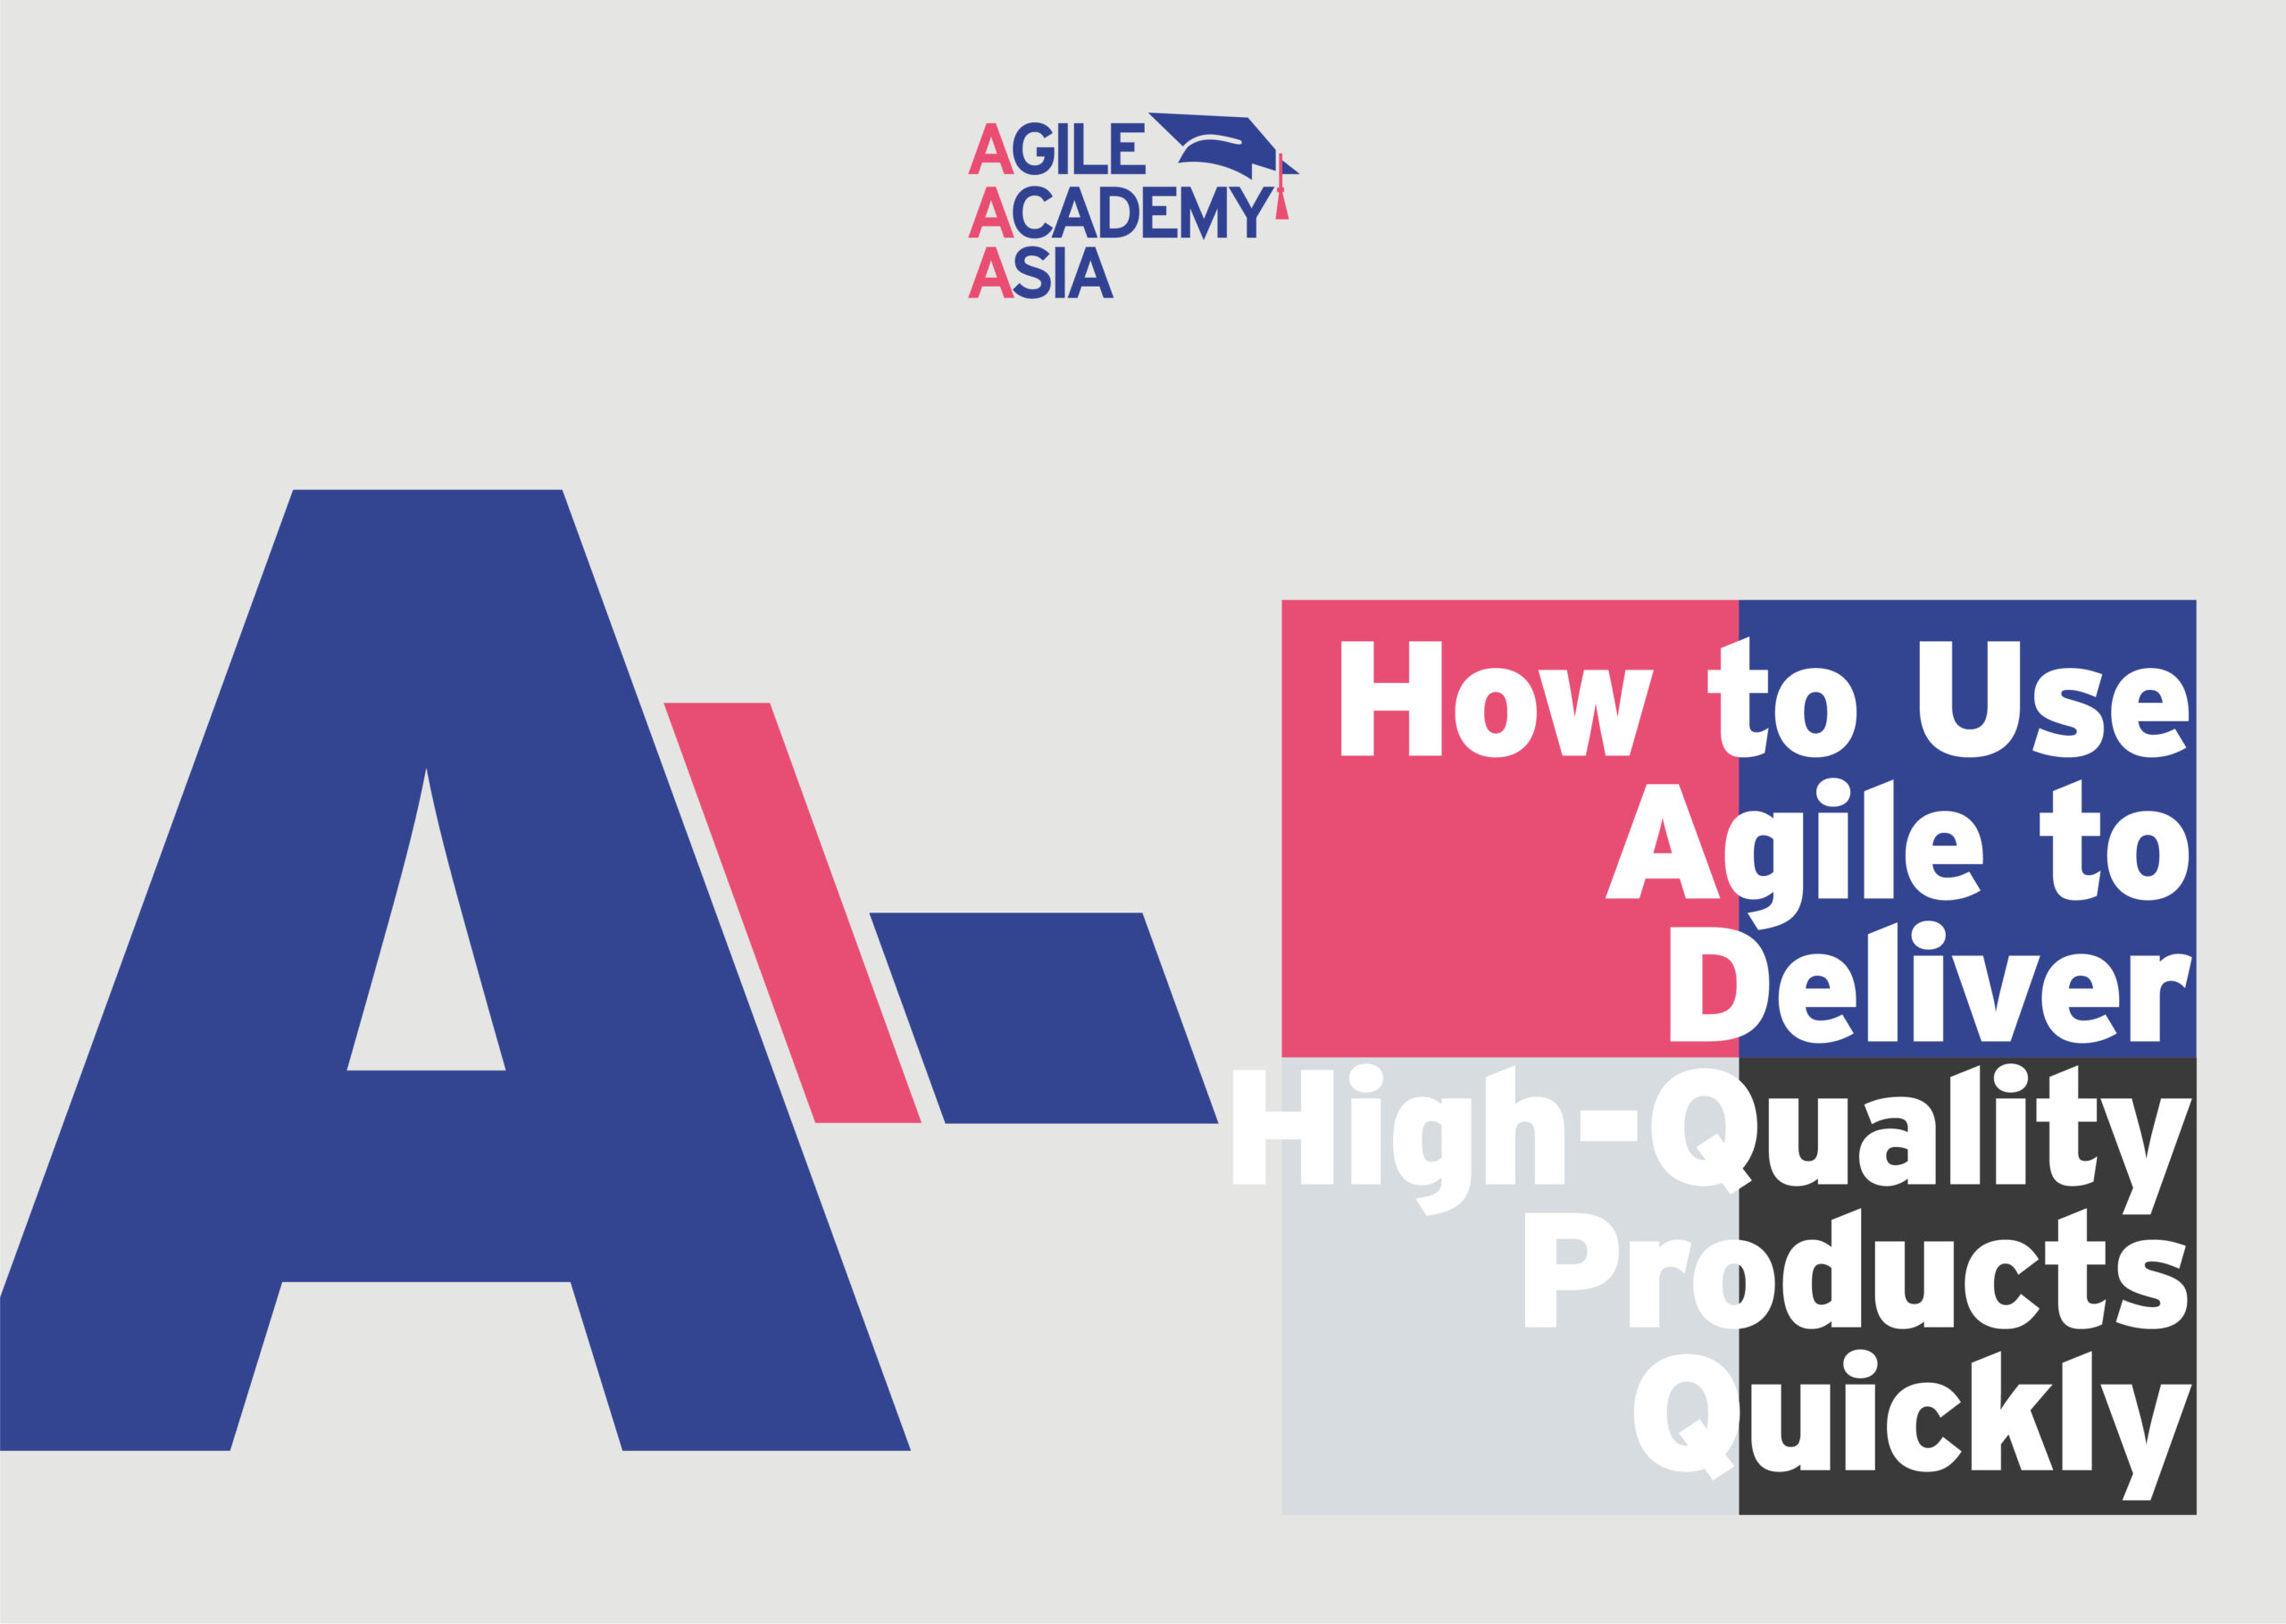 How to Use Agile to Deliver High-Quality Products Quickly